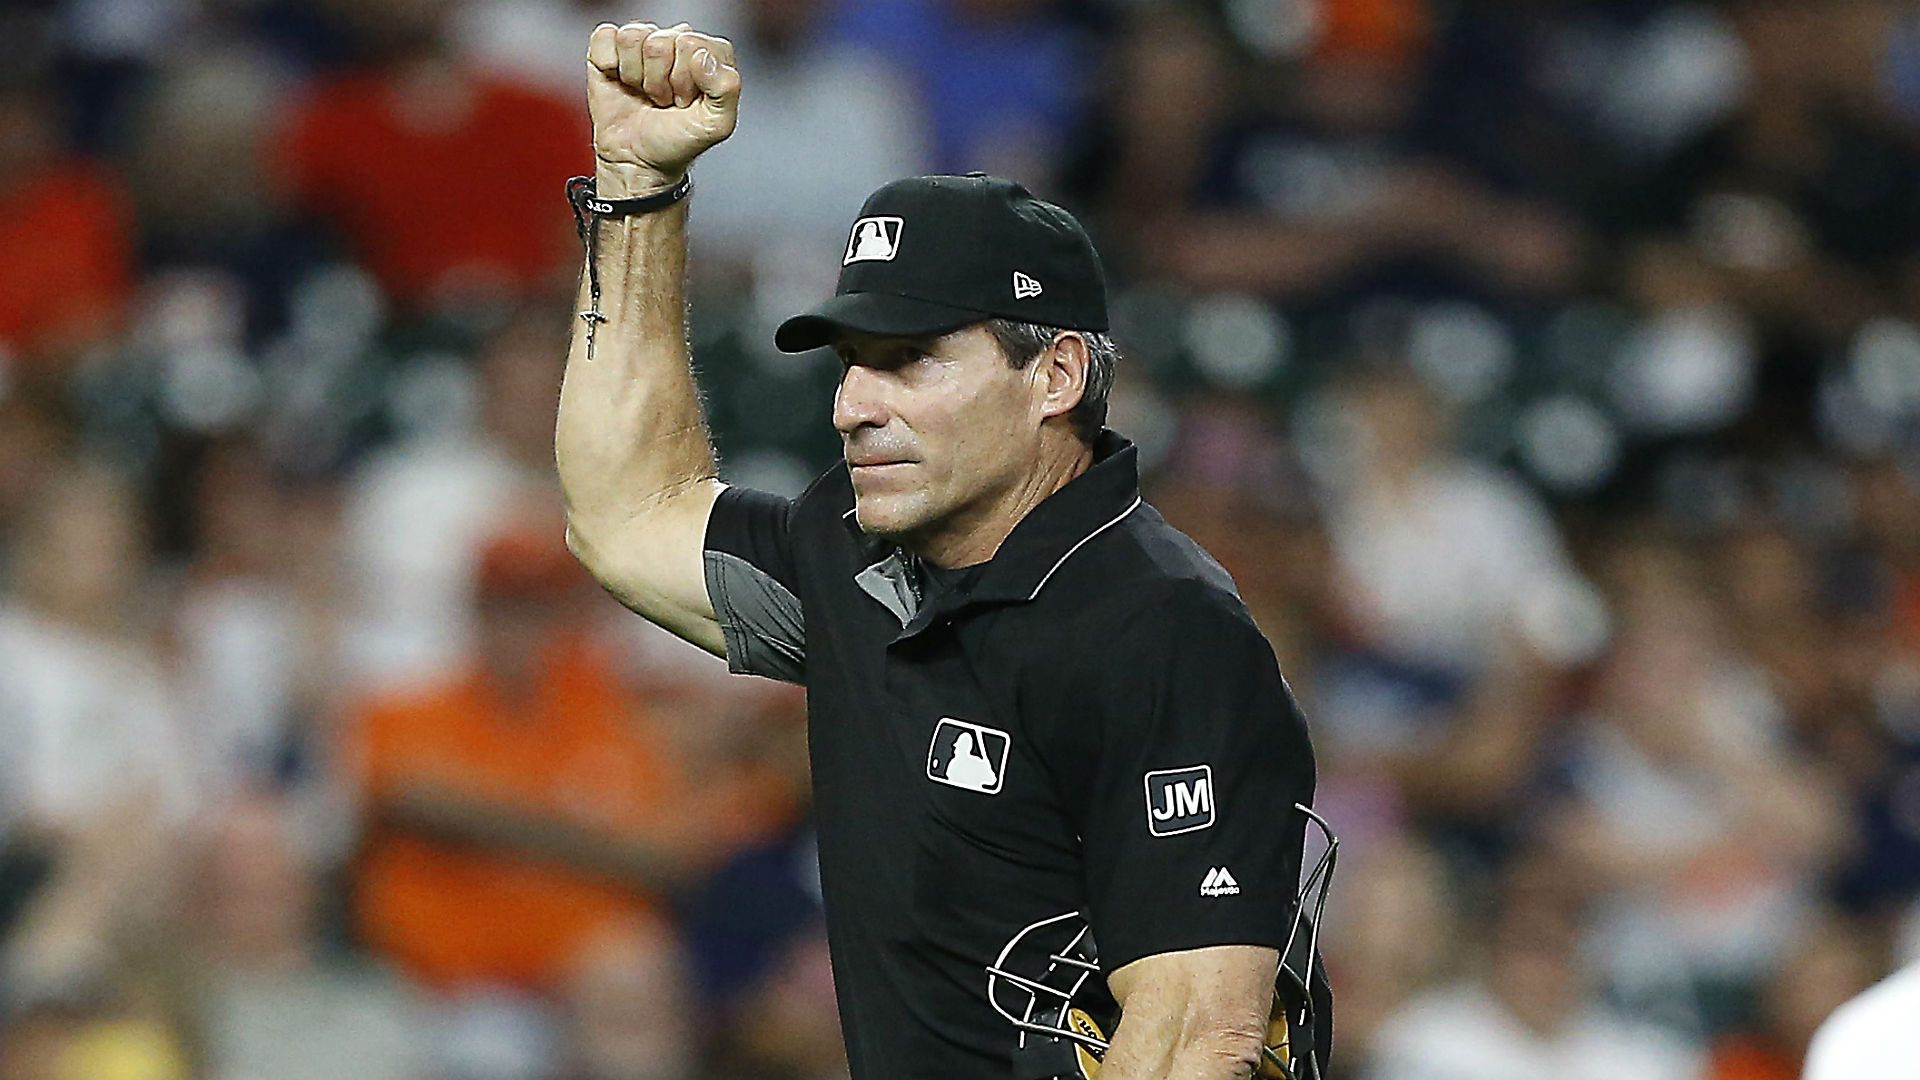 Angel Hernandez makes more objectively bad calls in YankeesJays game